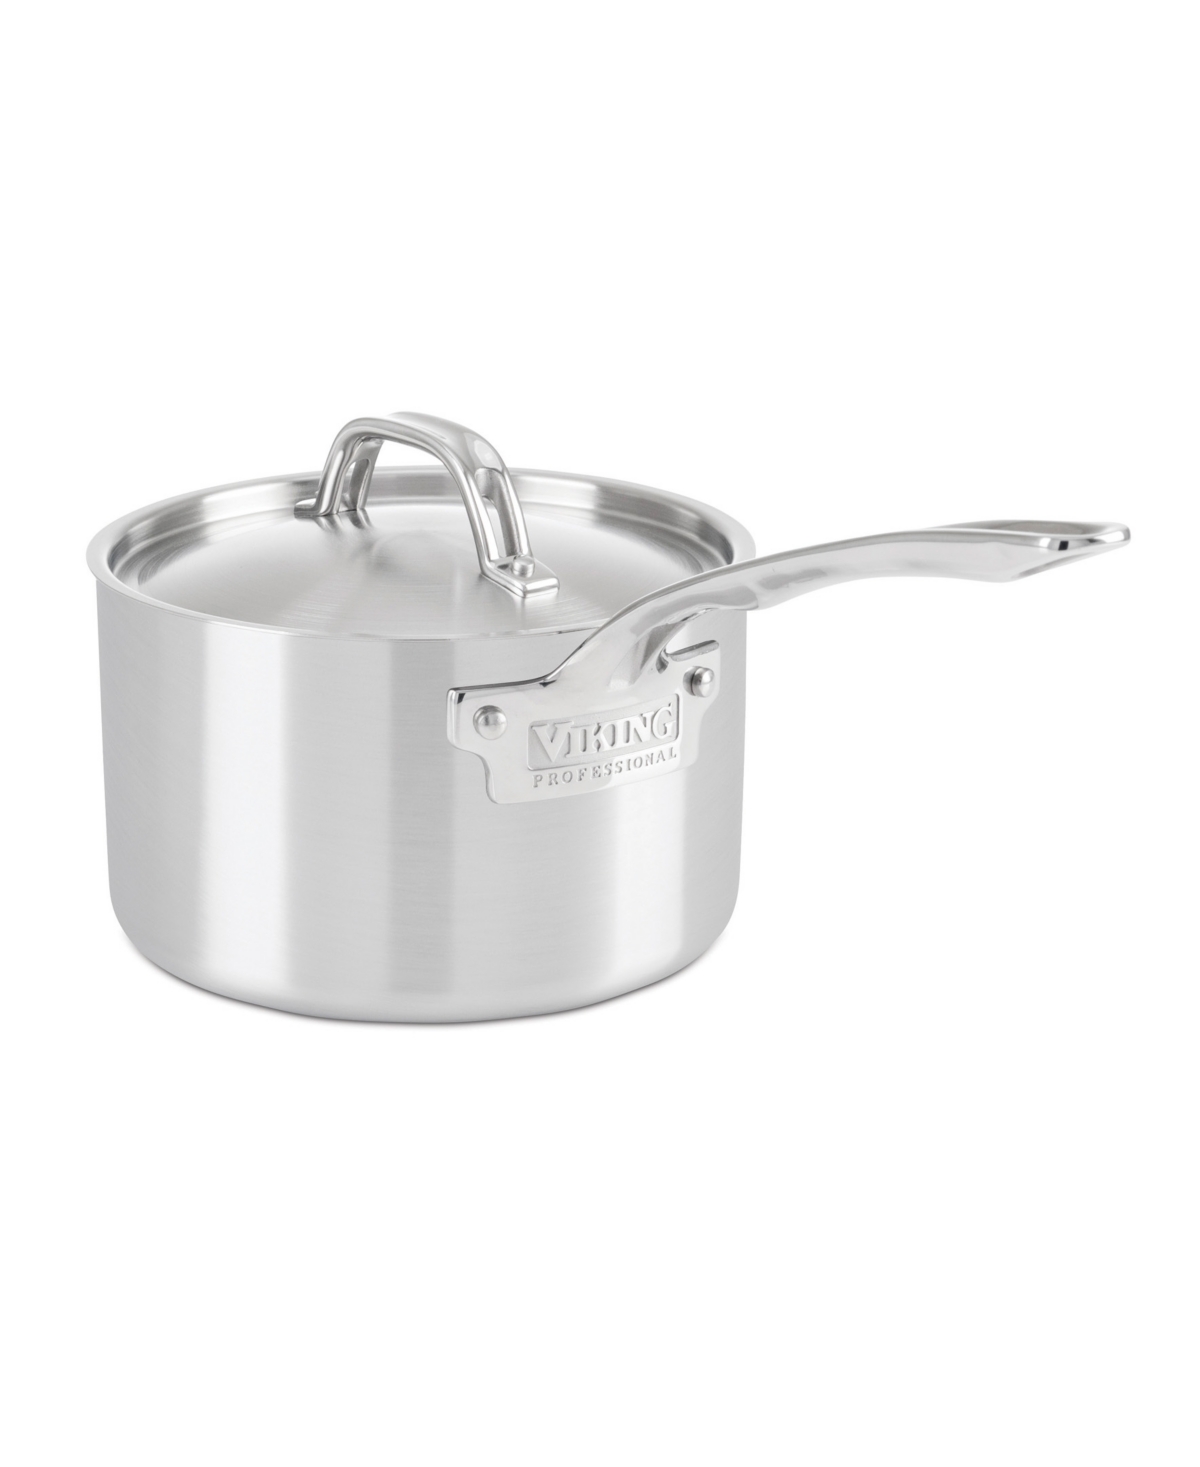 Viking Professional 5-ply Stainless Steel 3-quart Sauce Pan With Metal Lid